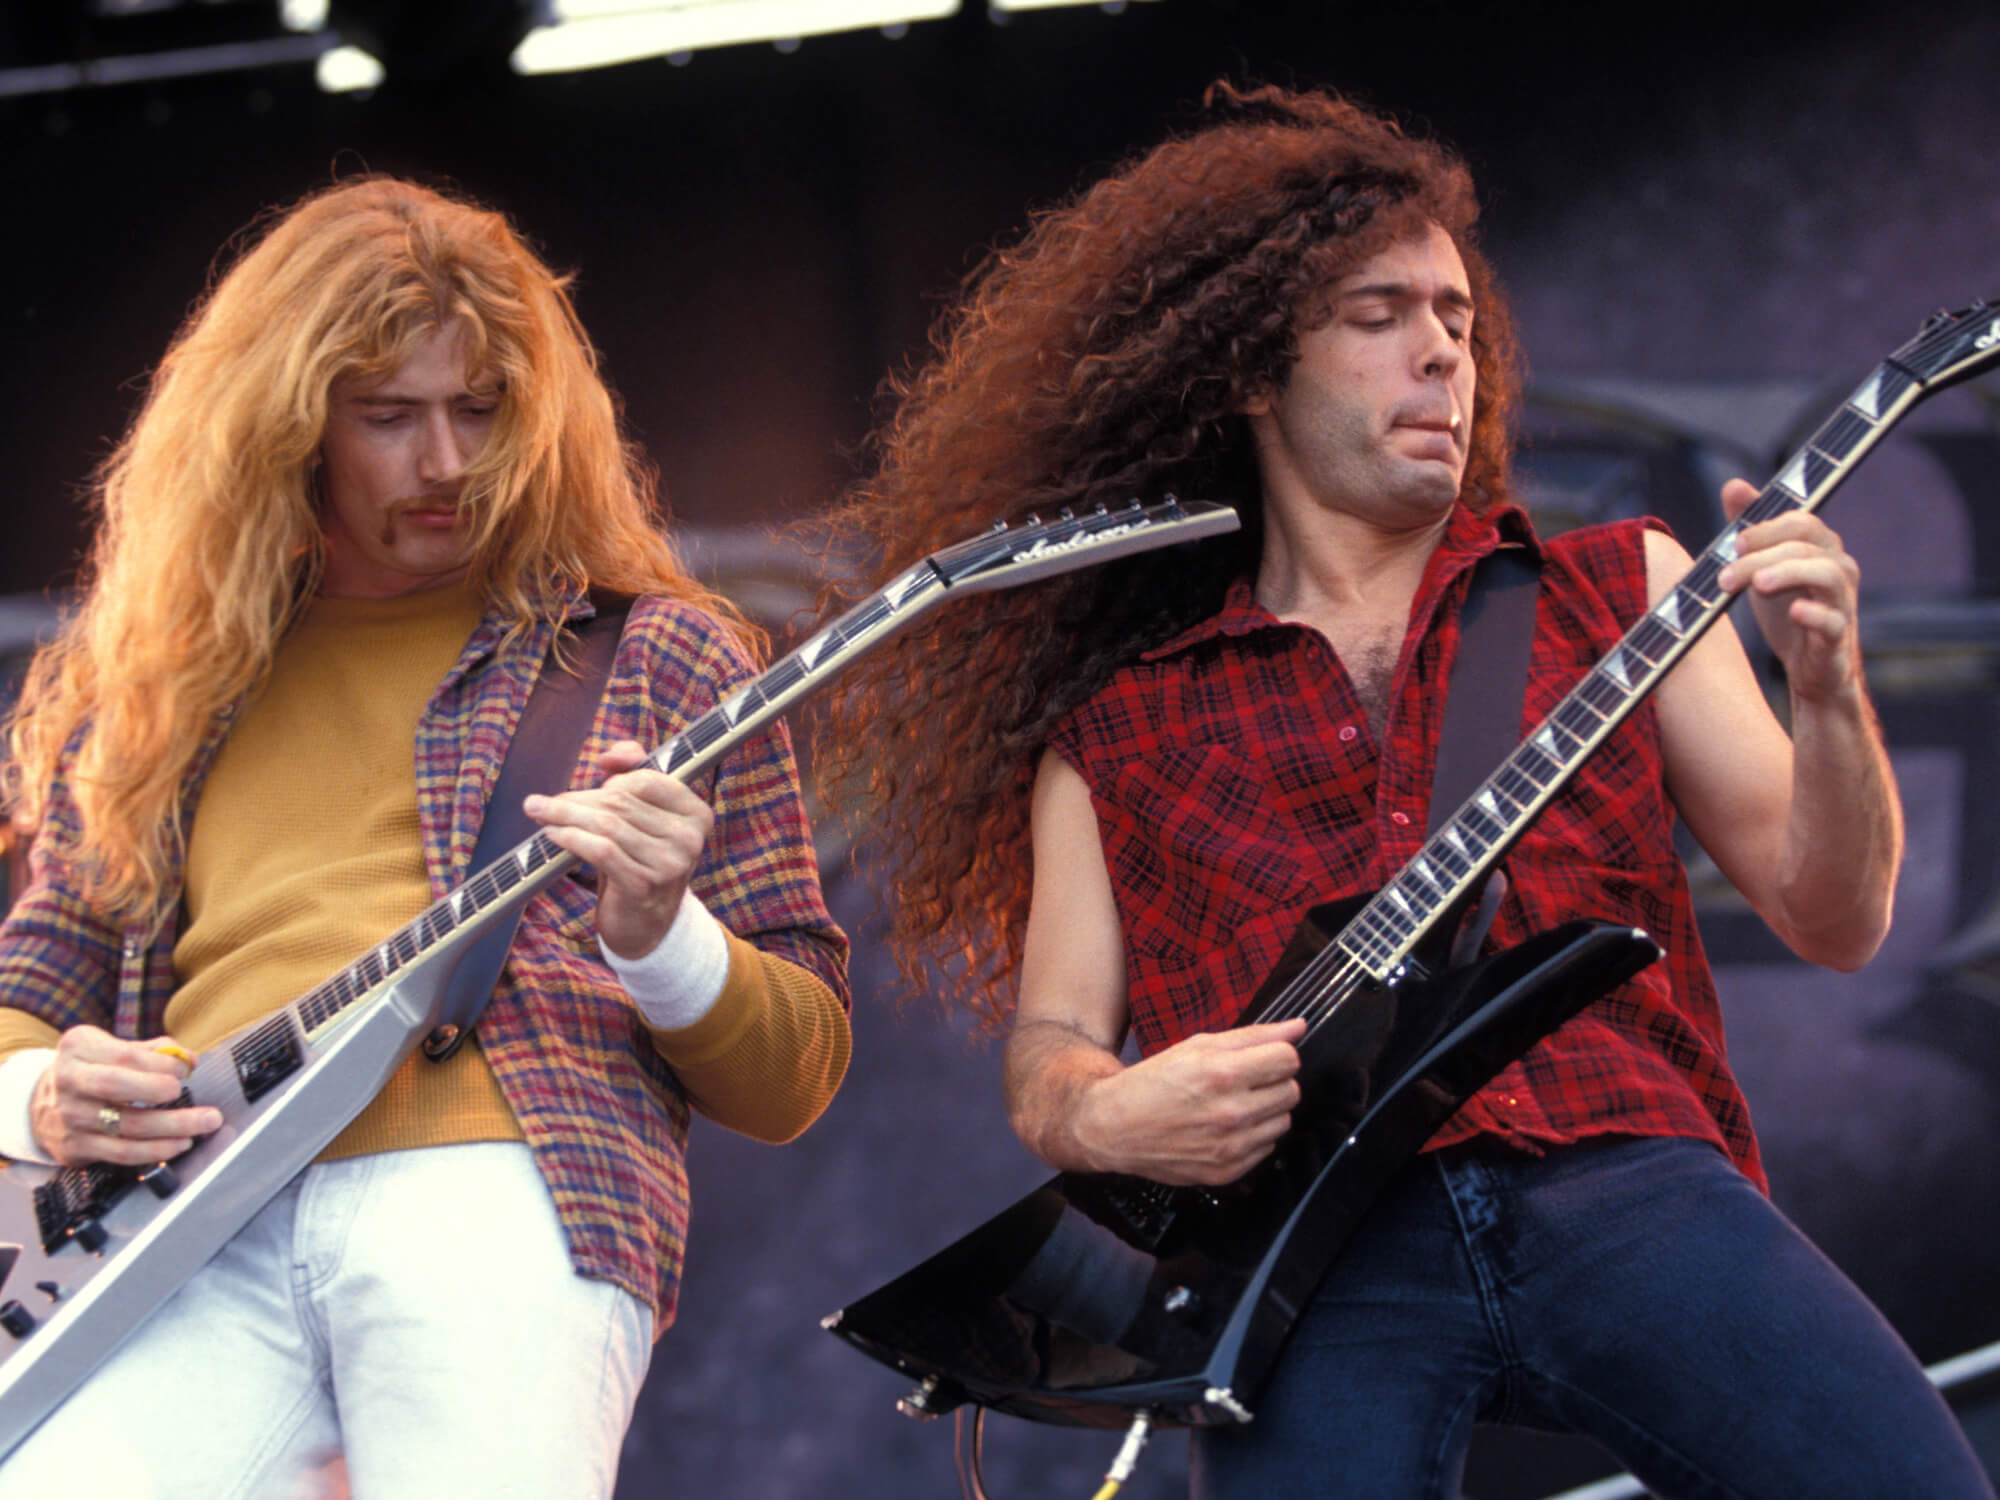 Dave Mustaine and Marty Friedman performing with Megadeth